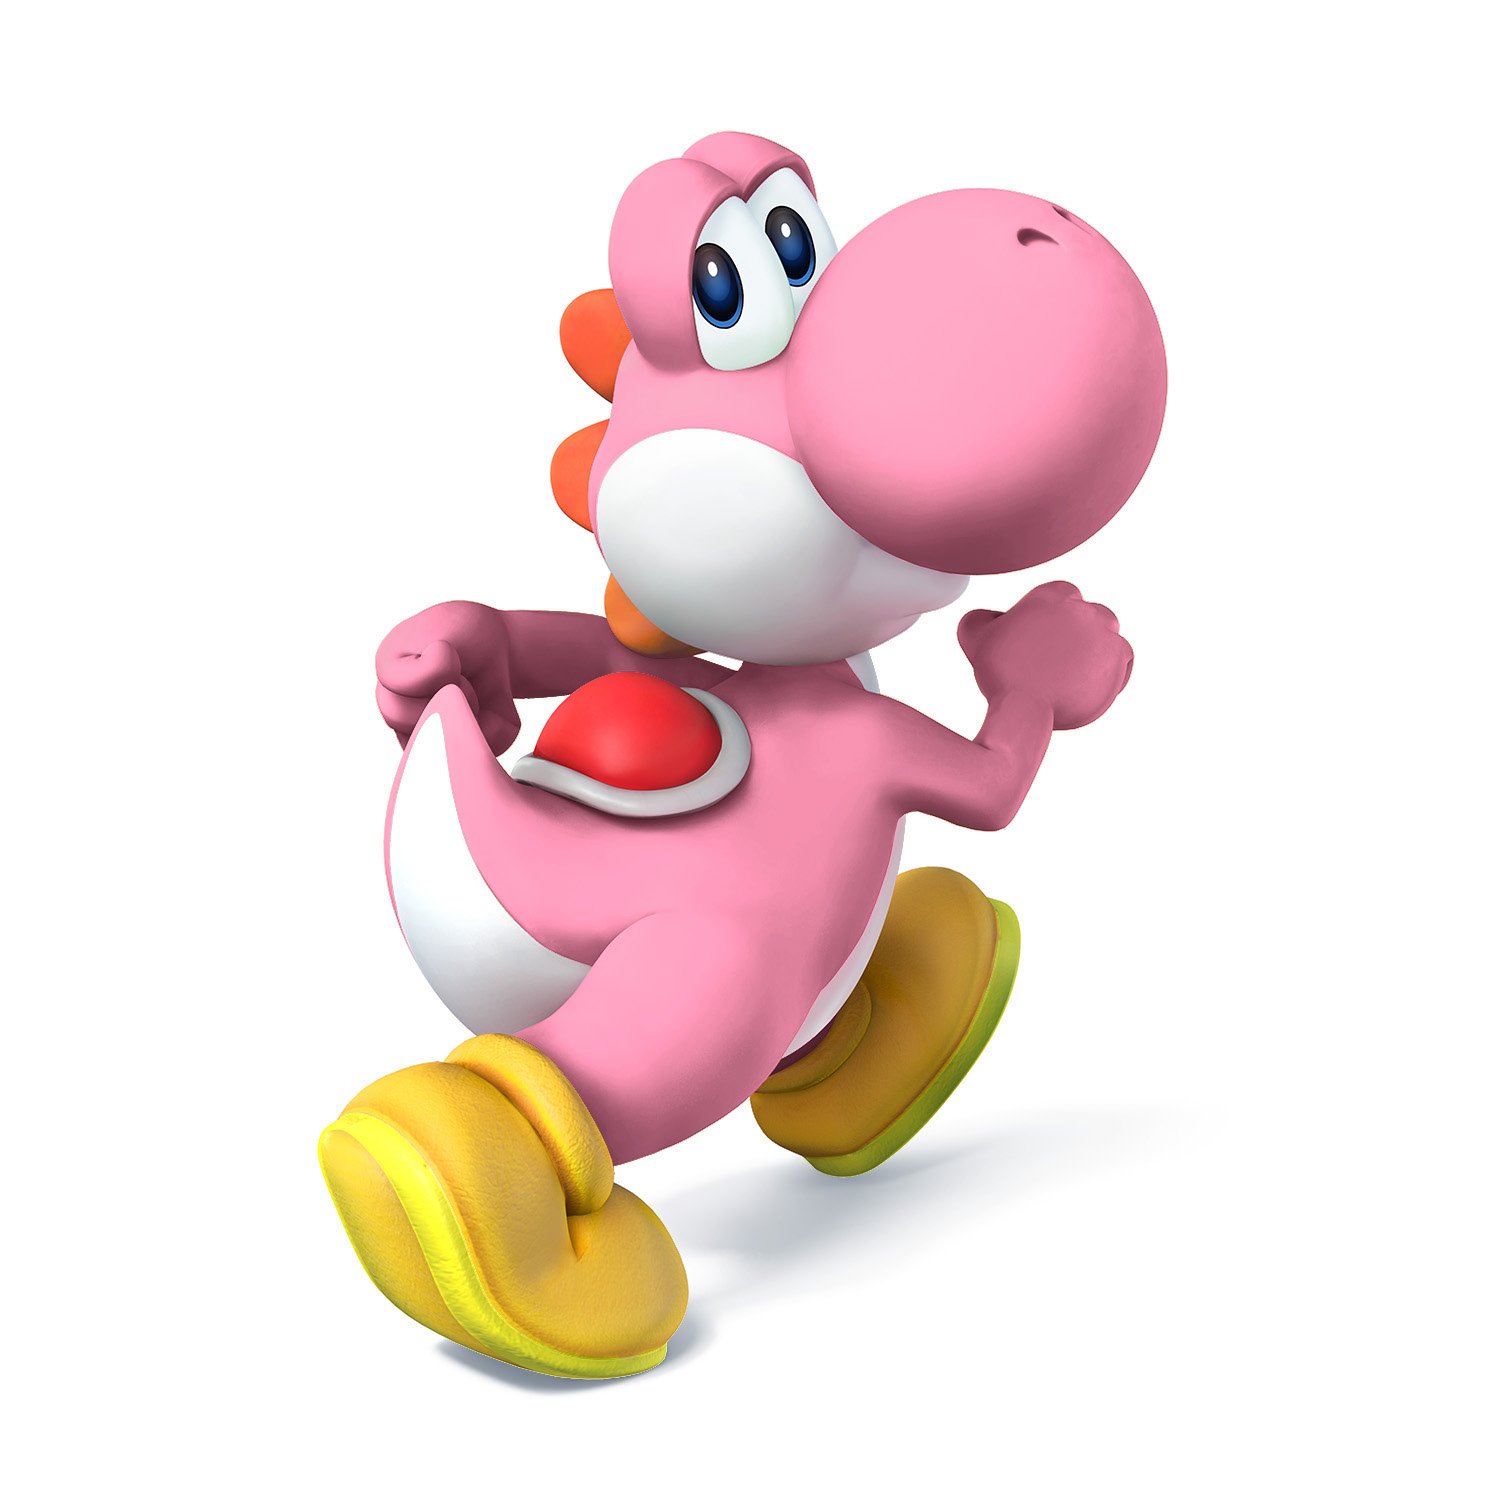 Yoshi palette swaps from Super Smash Bros. for Nintendo 3DS / Wii U.